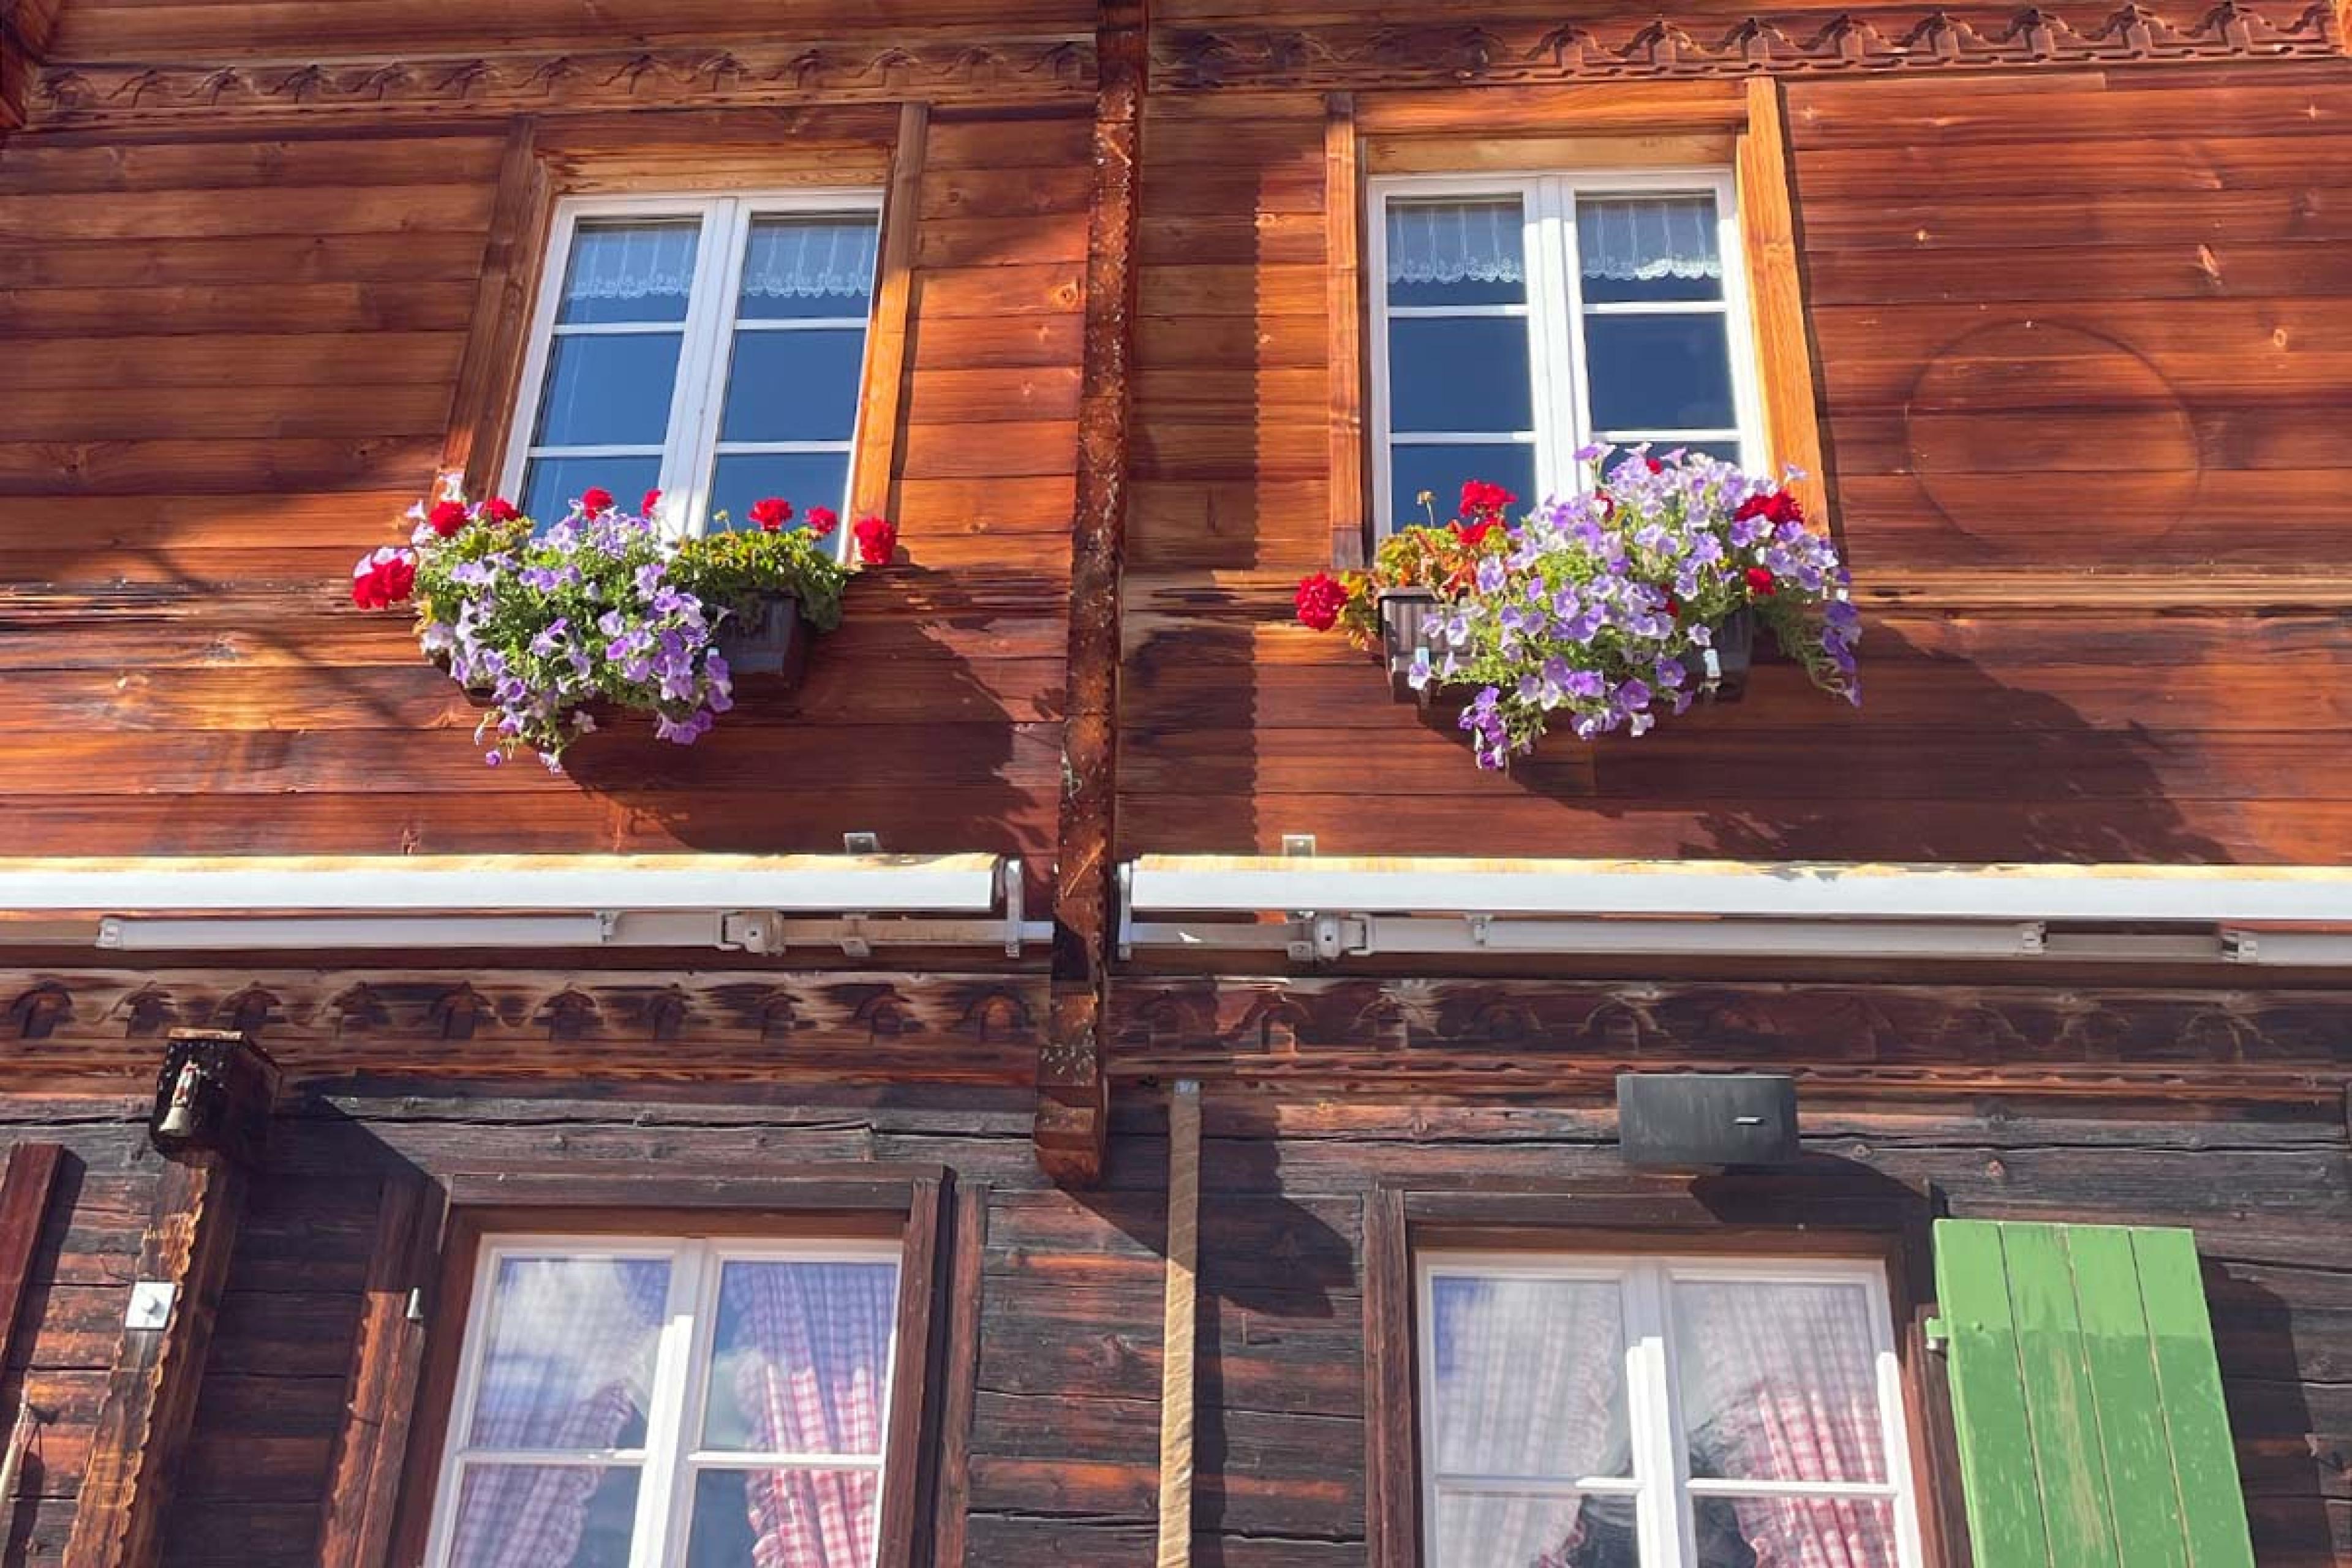 wooden building with colorful flower boxes and green shutters